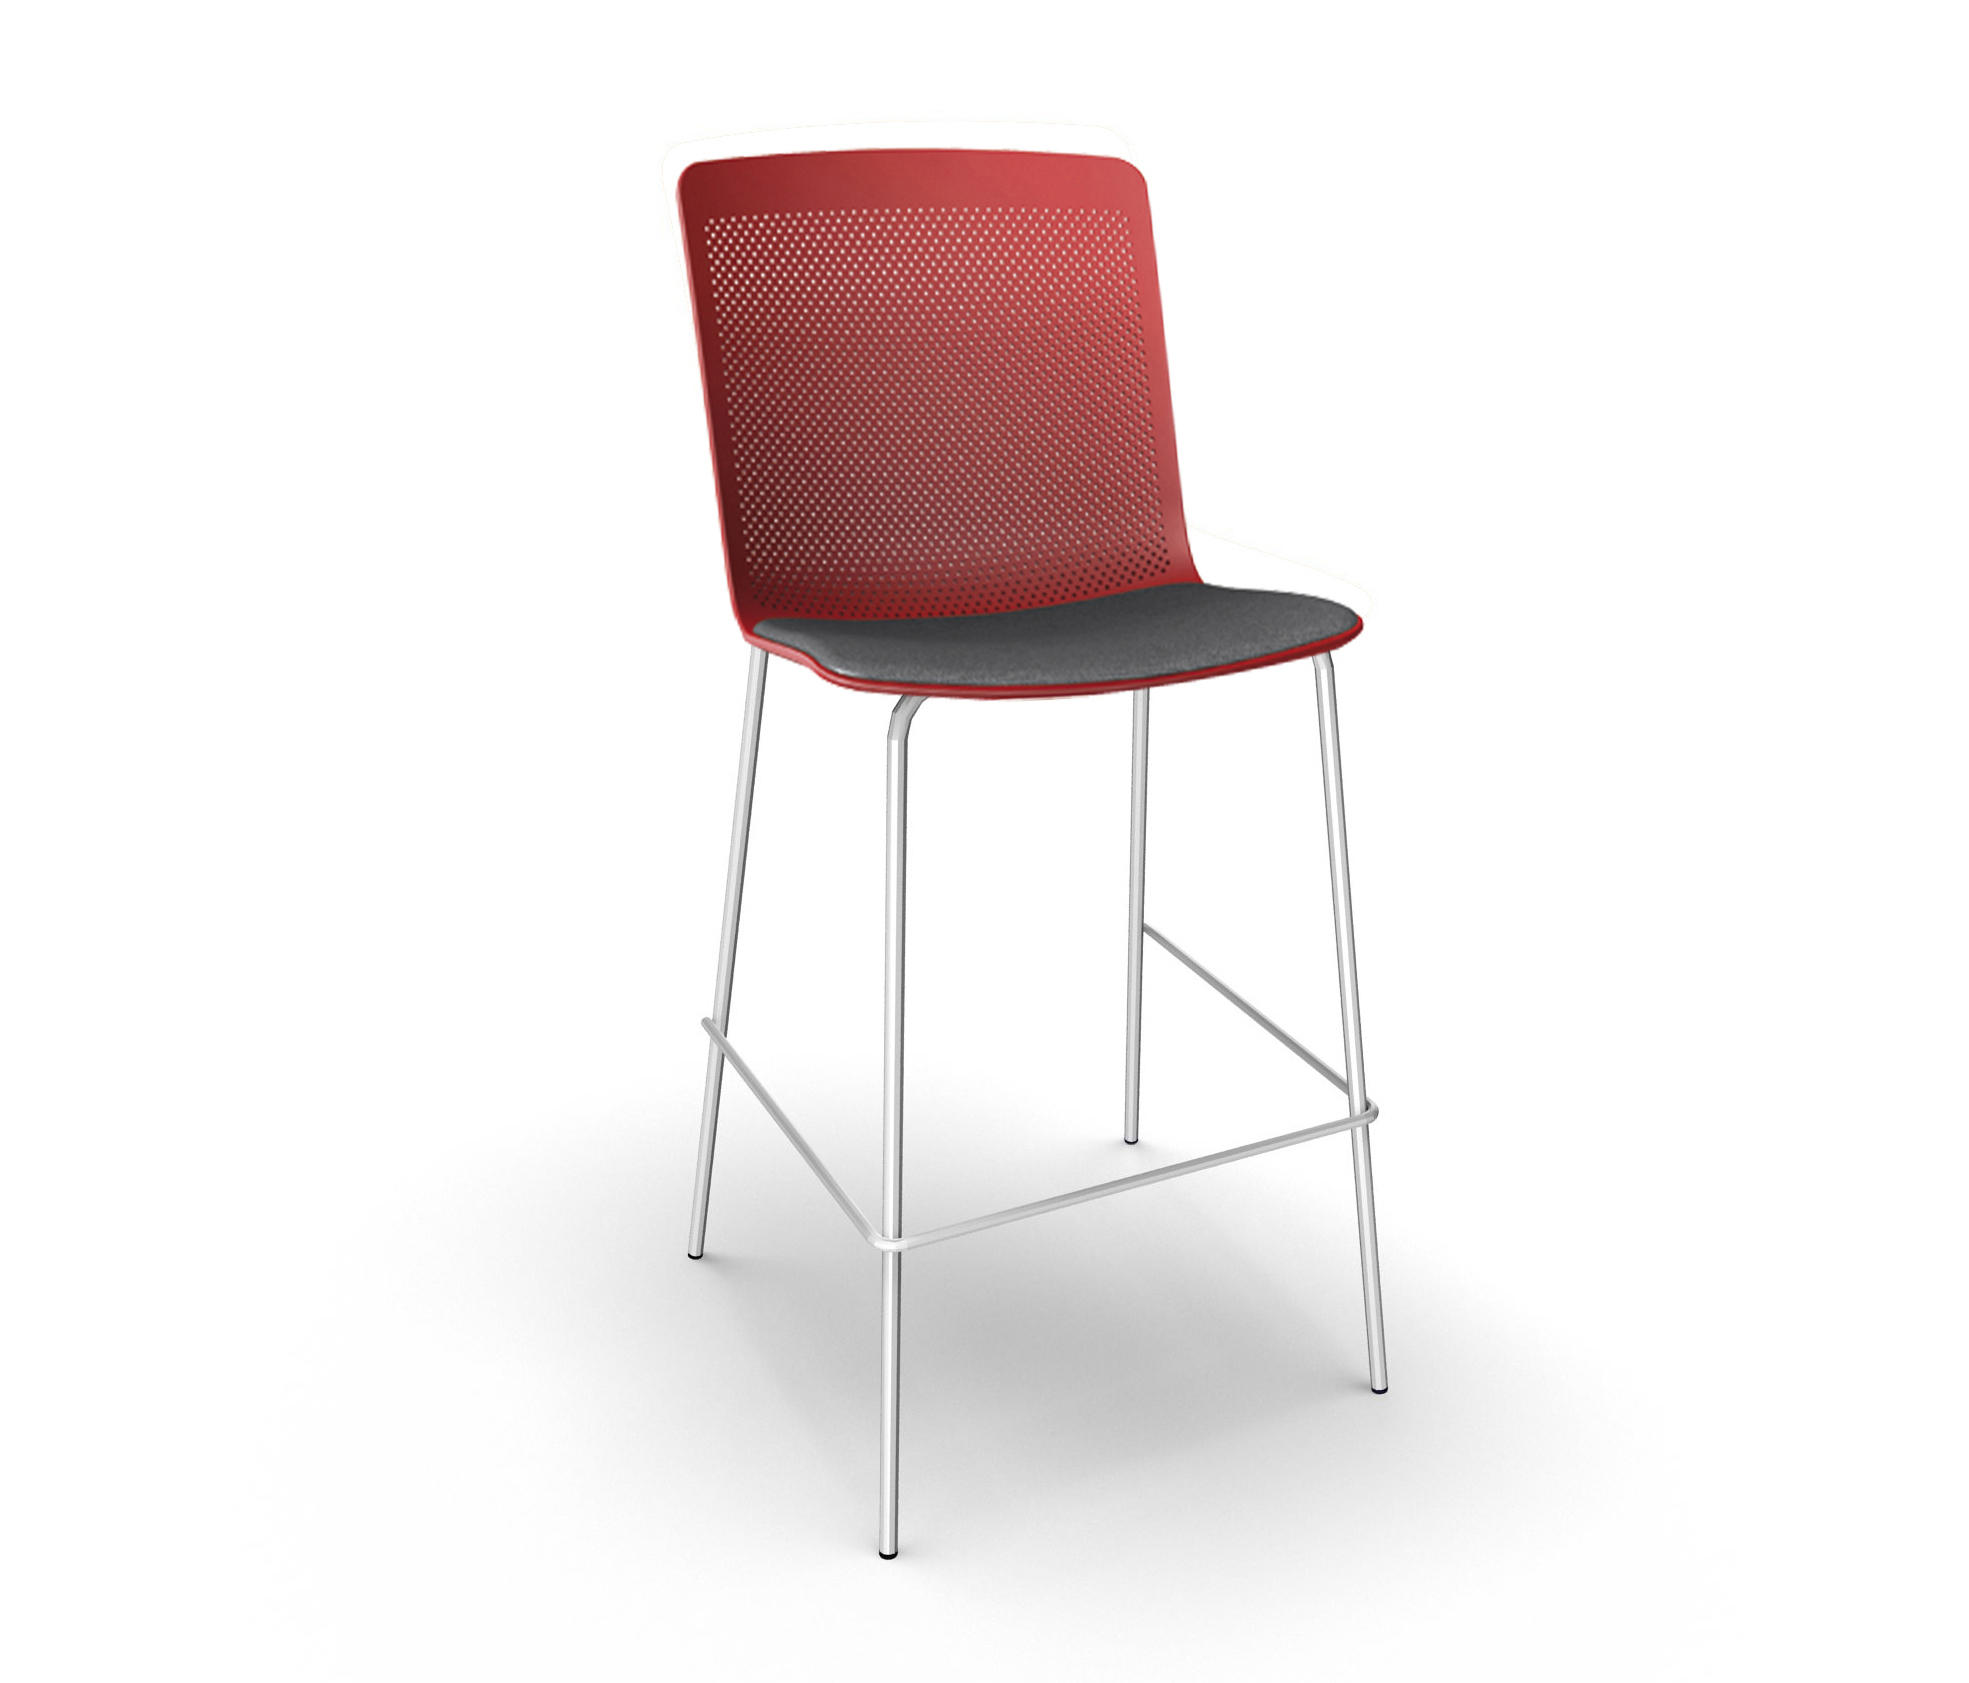 Bar | GLOVE stools Architonic Forma from 5 -